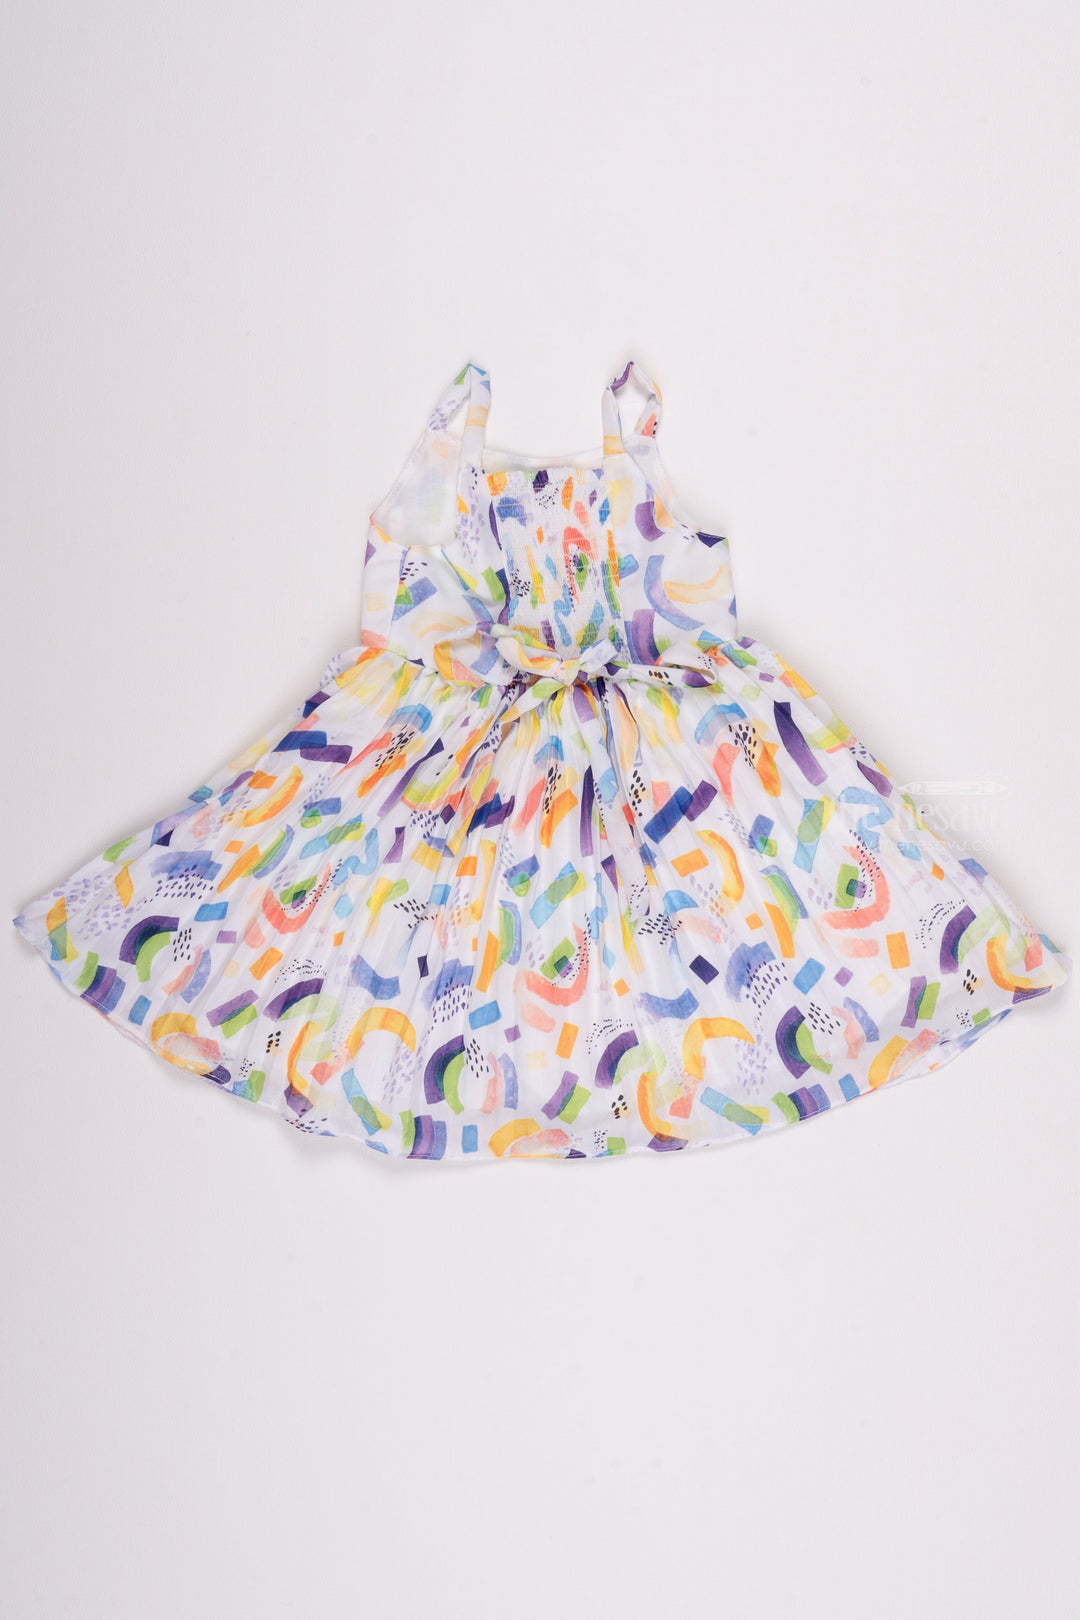 The Nesavu Girls Fancy Frock Gorgeous Abstract Blue: Simple Design Frock - Fancy Frock with Collared Overcoat for Girls Nesavu Adorable Baby Fancy Wear Collection | Daily Wear Fancy Frocks for Children | The Nesavu